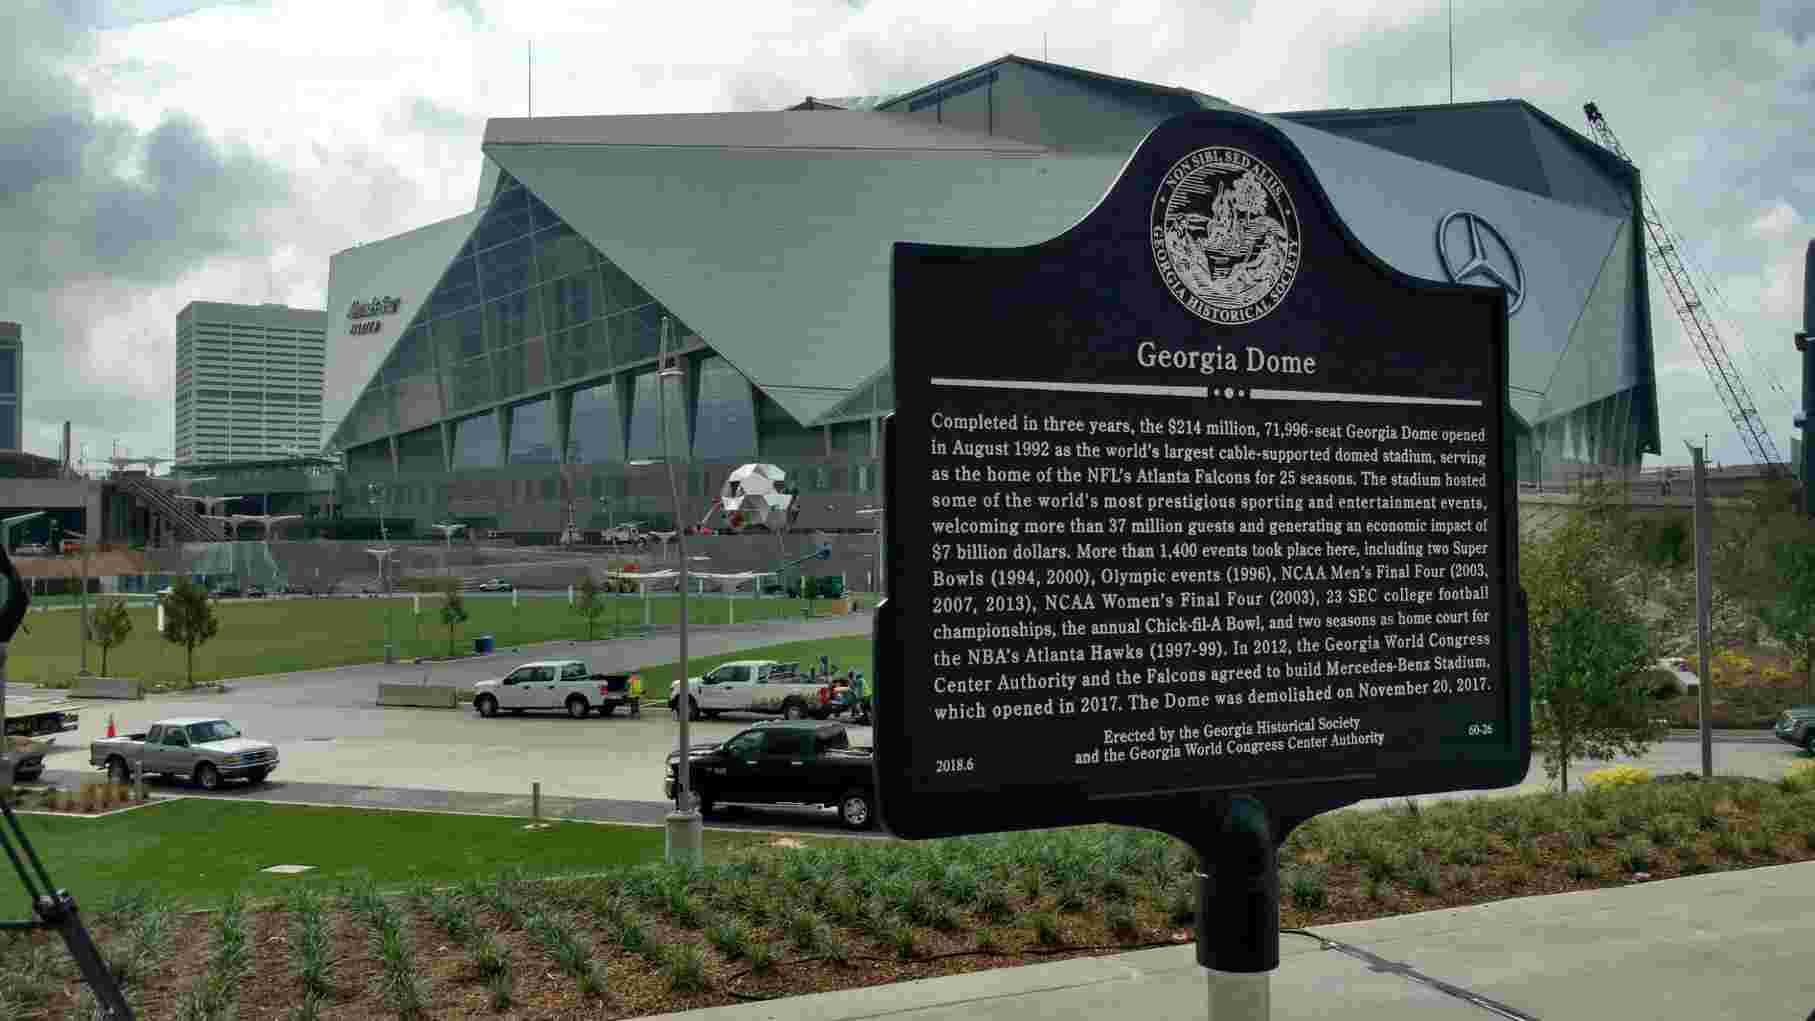 Stop 14, Site of the Georgia Dome